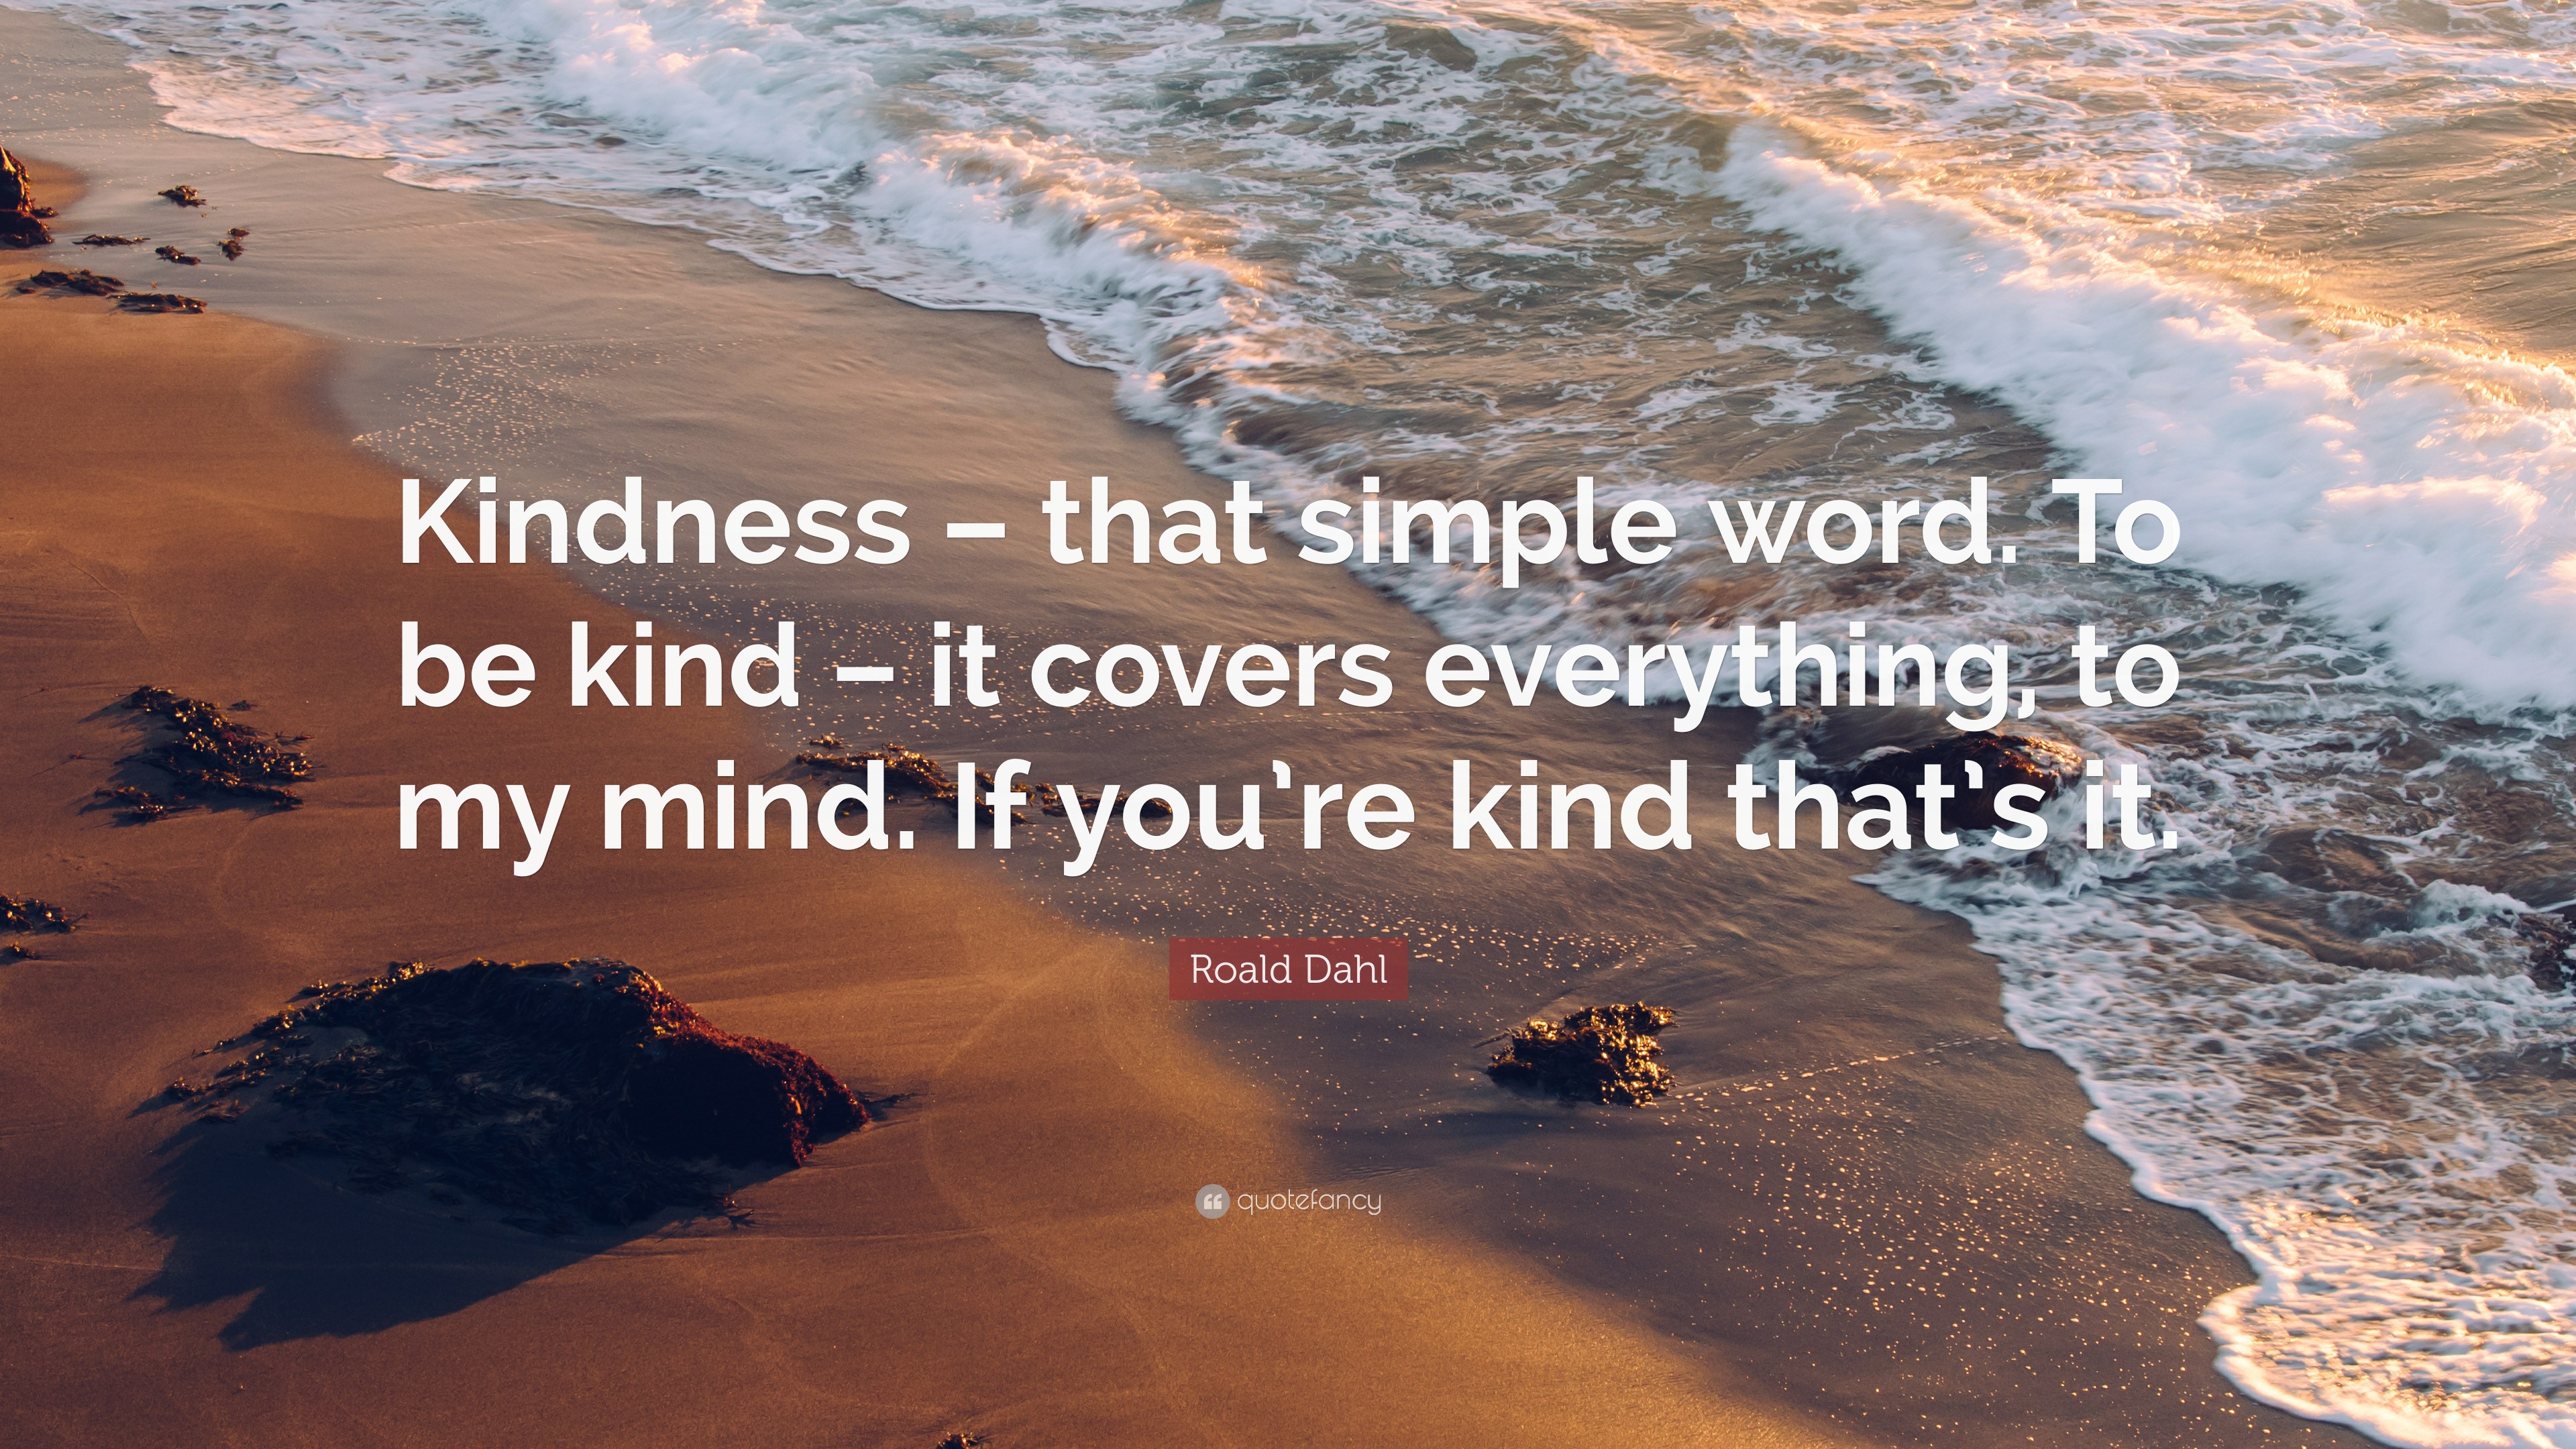 Roald Dahl Quote “Kindness that simple word. To be kind